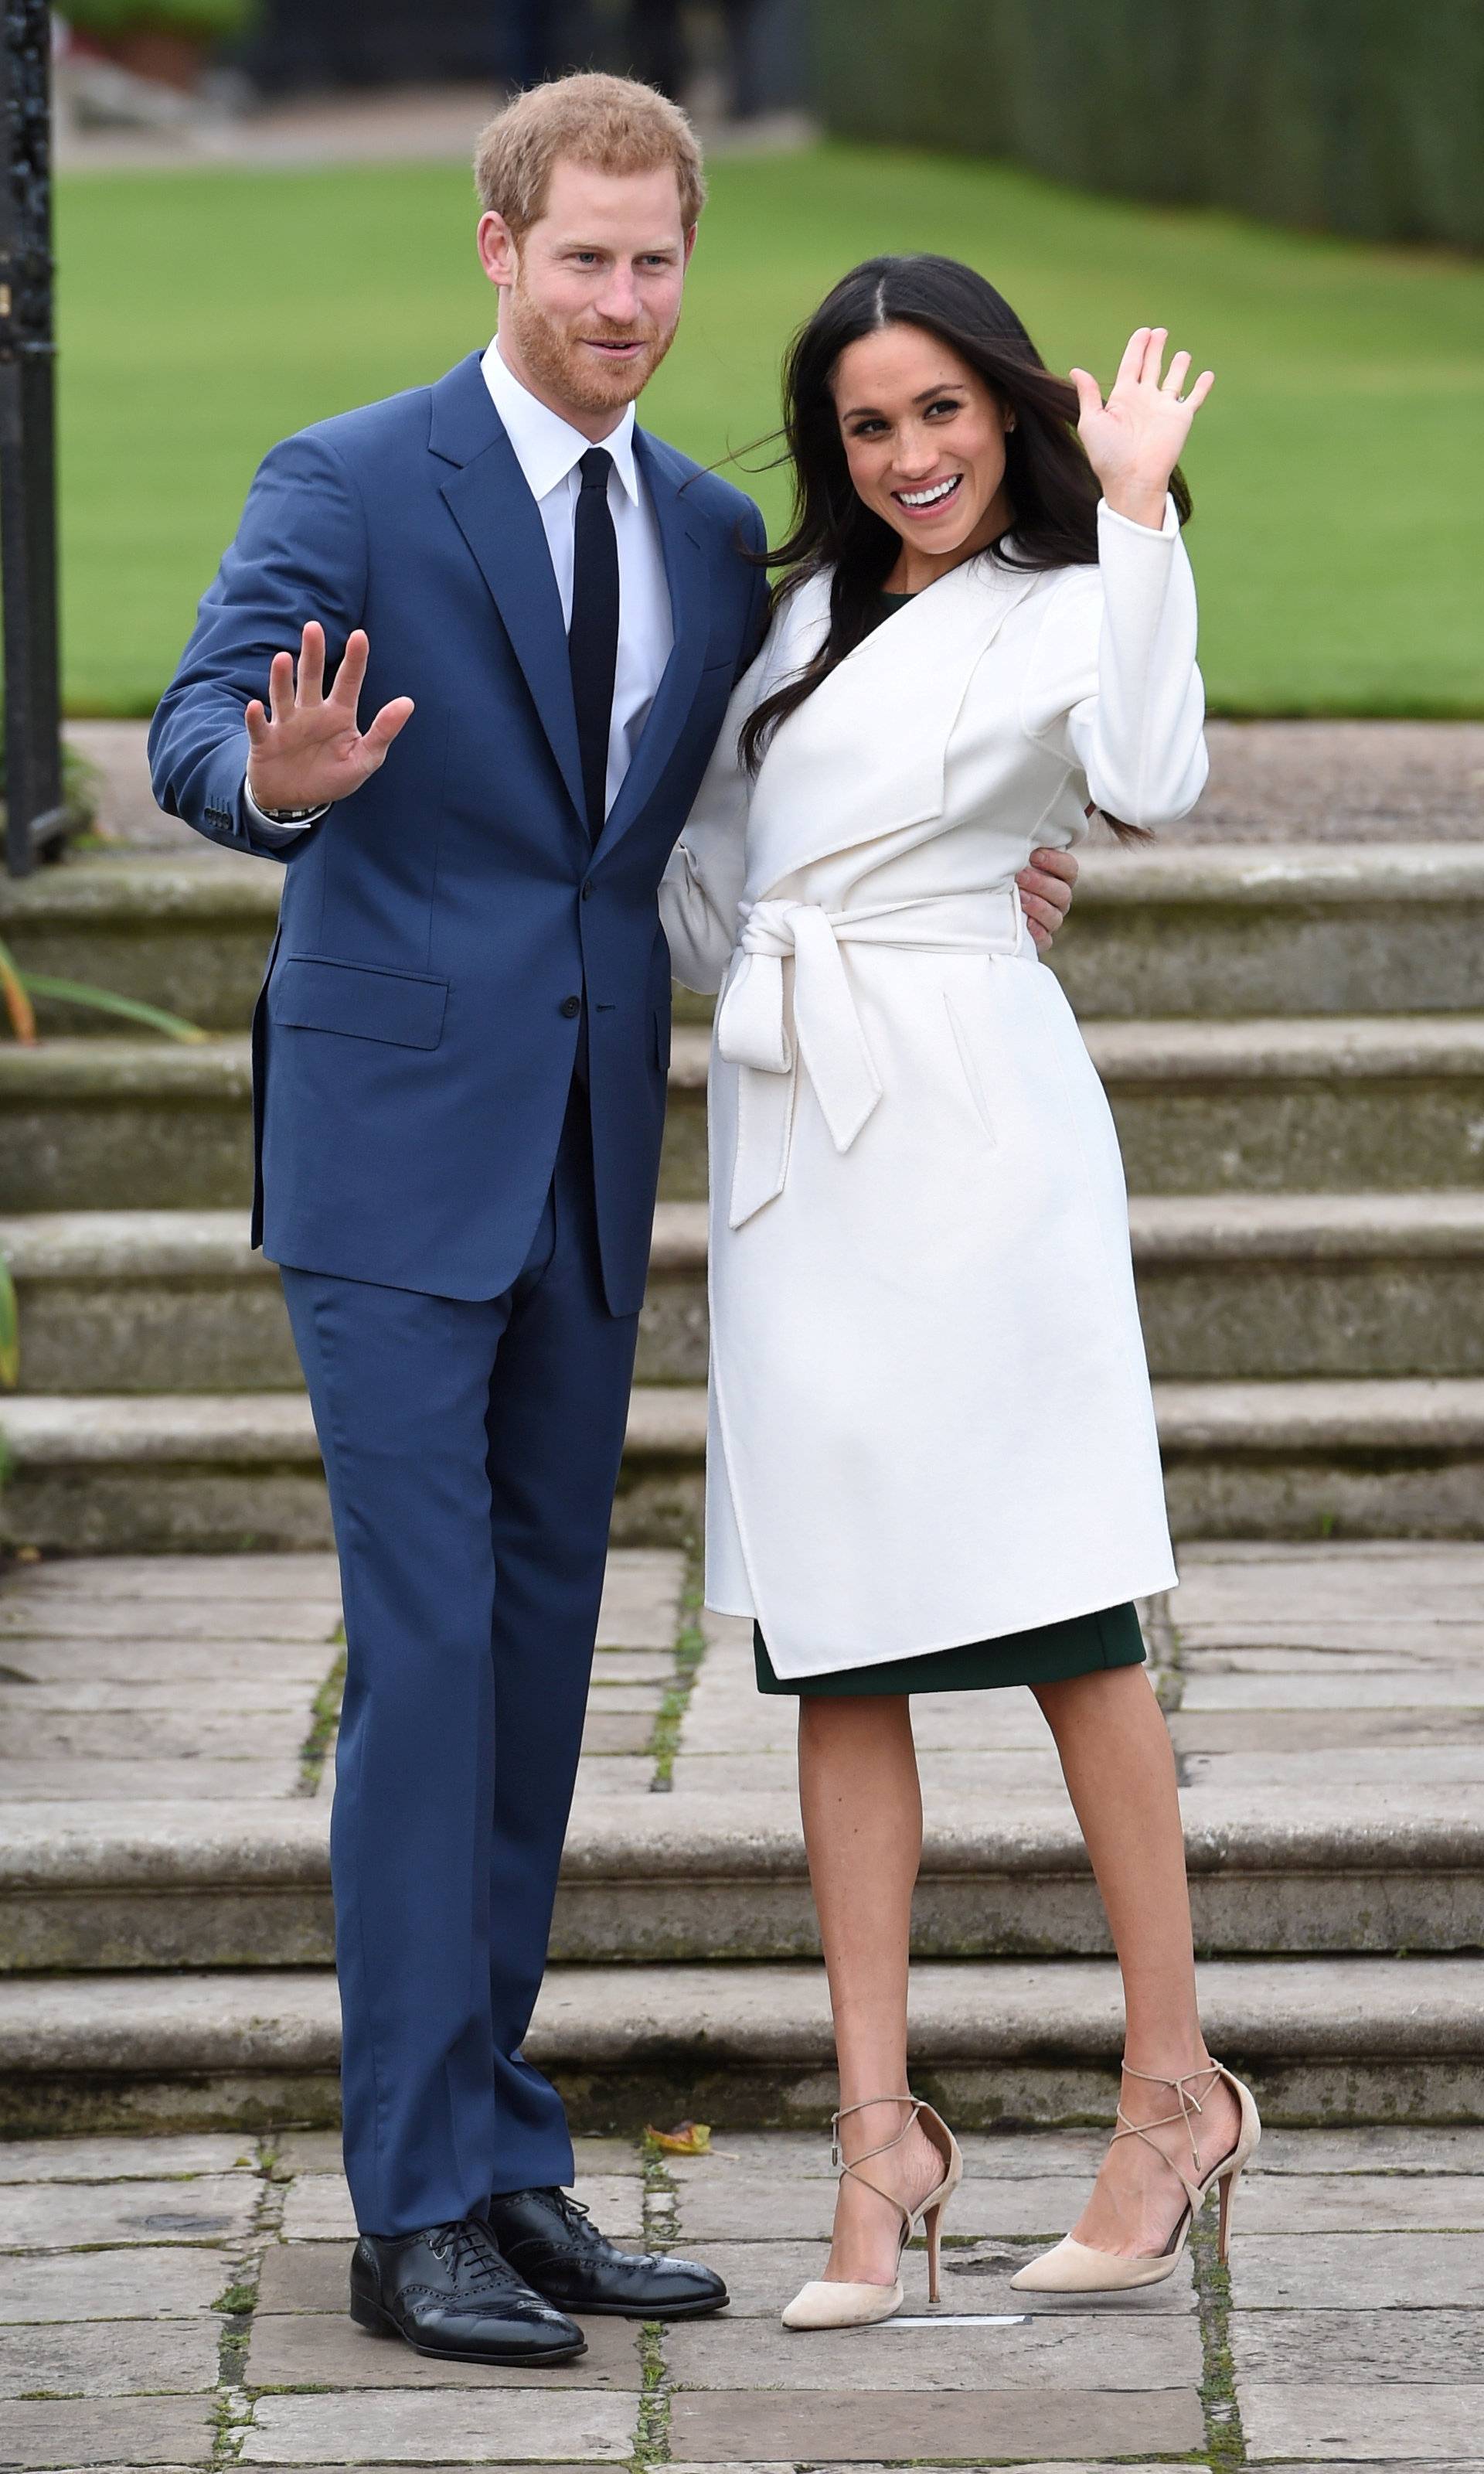 FILE PHOTO: Britain's Prince Harry poses with Meghan Markle in the Sunken Garden of Kensington Palace, London